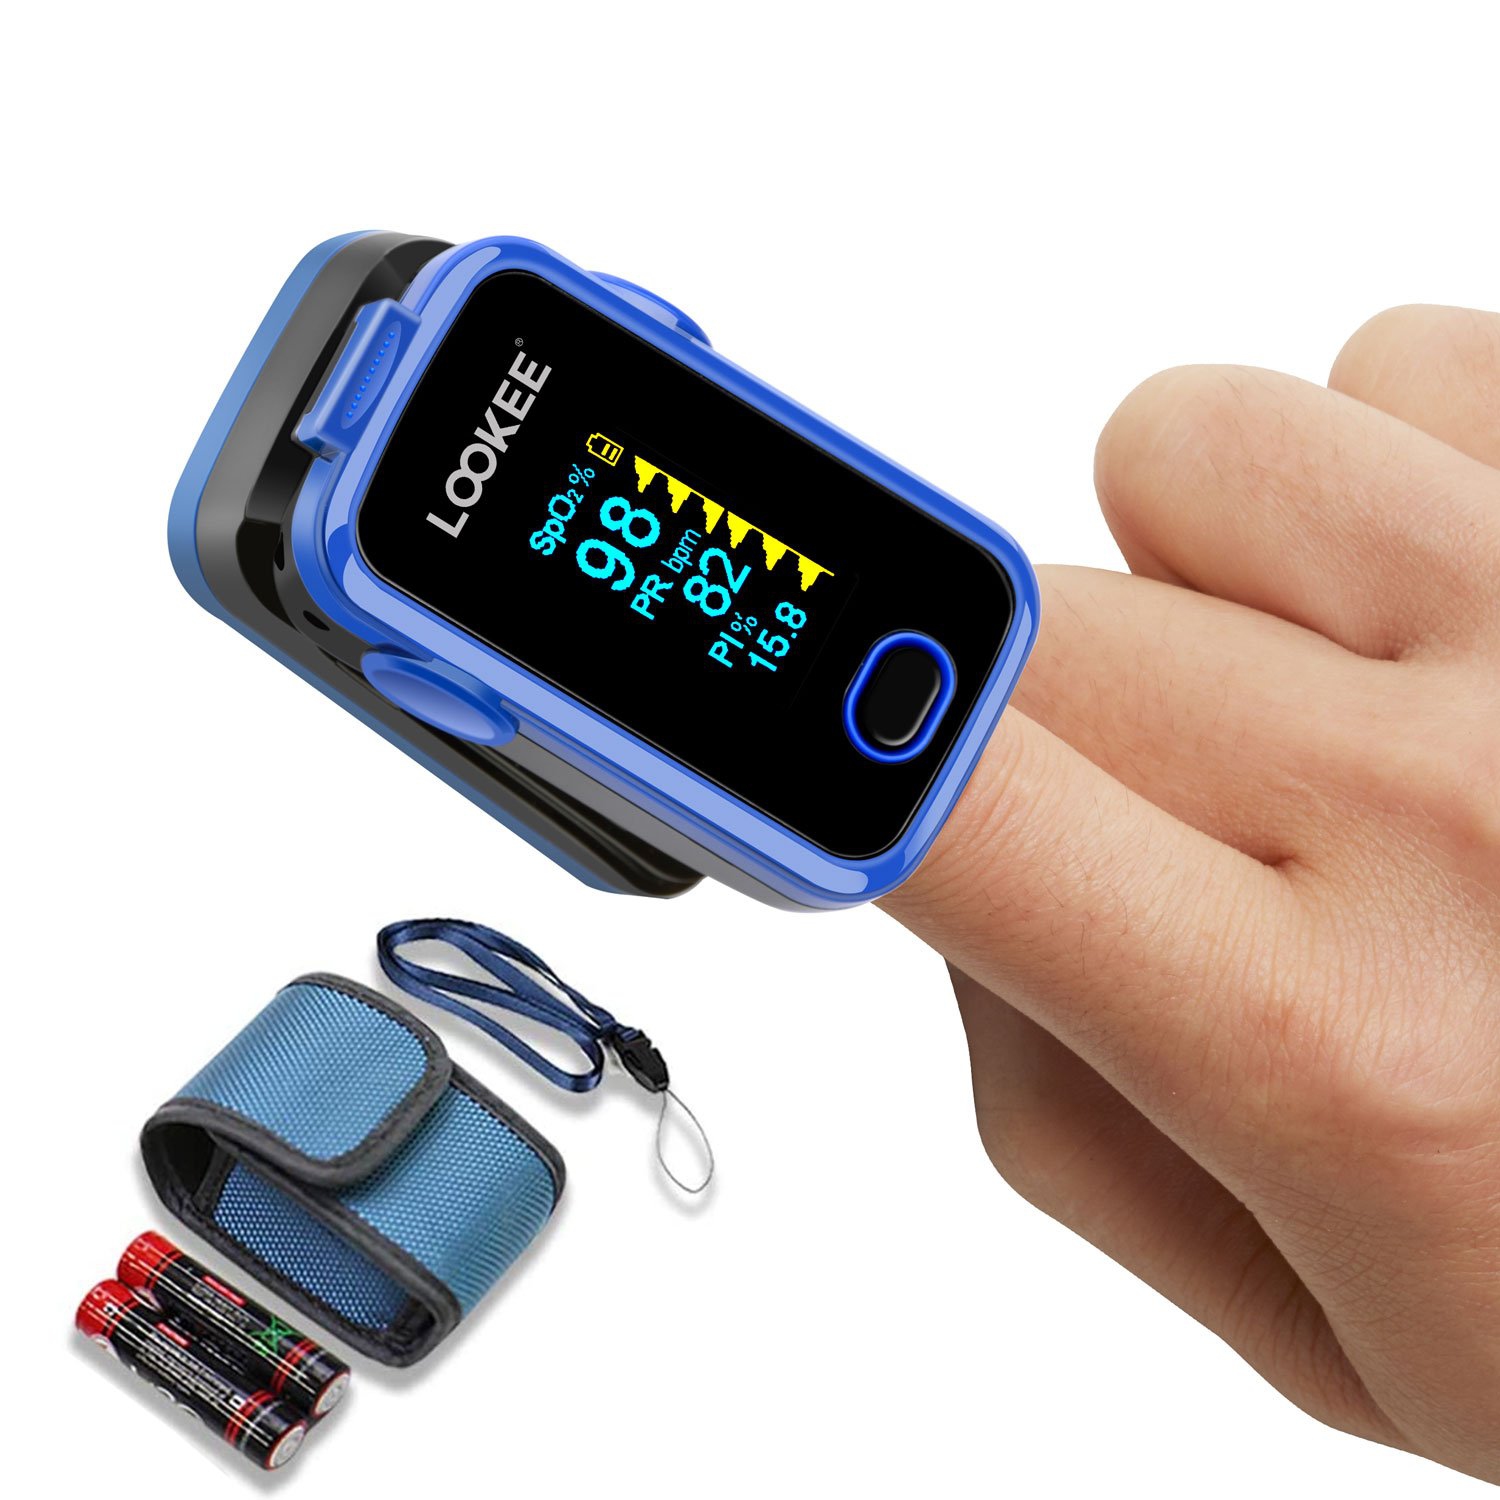 LOOKEE® A310 Premium Finger Pulse Oximeter Blood Oxygen Saturation Monitor with Alarm, Plethysmograph and Perfusion Index